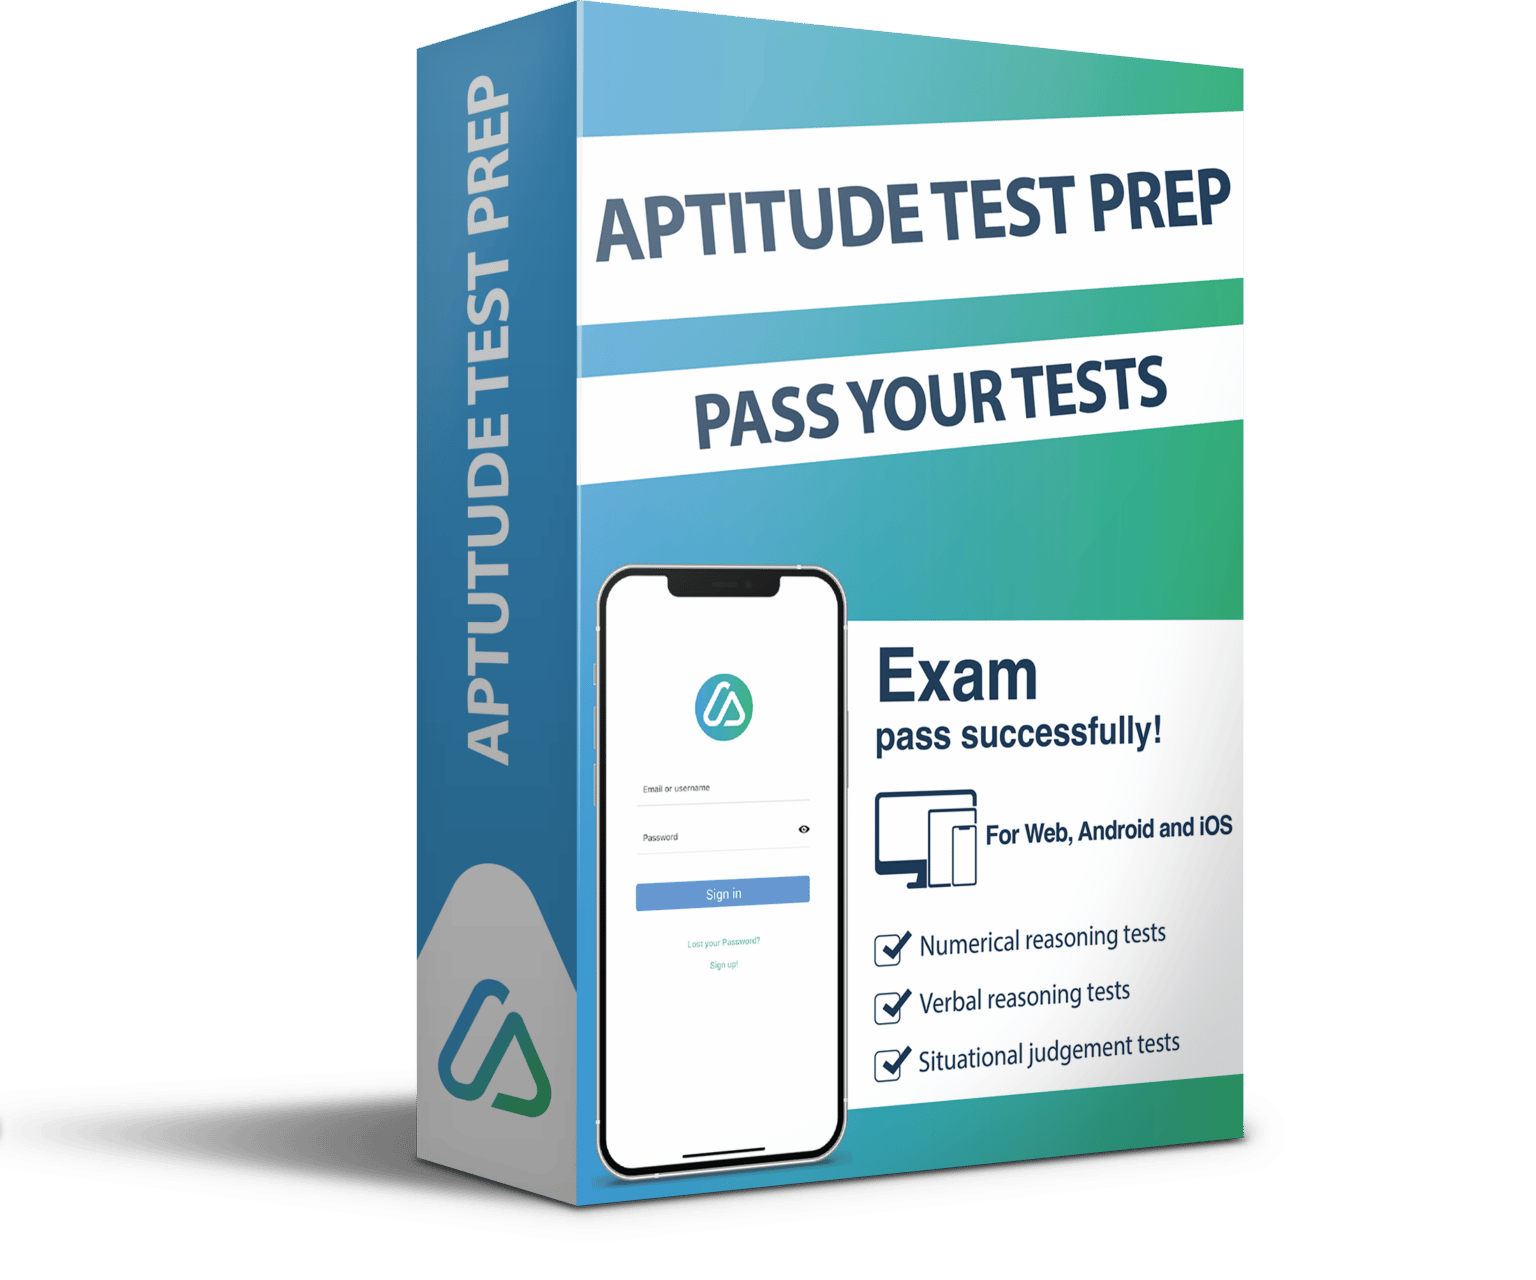 aon-assessment-test-prep-pass-your-tests-aptitude-test